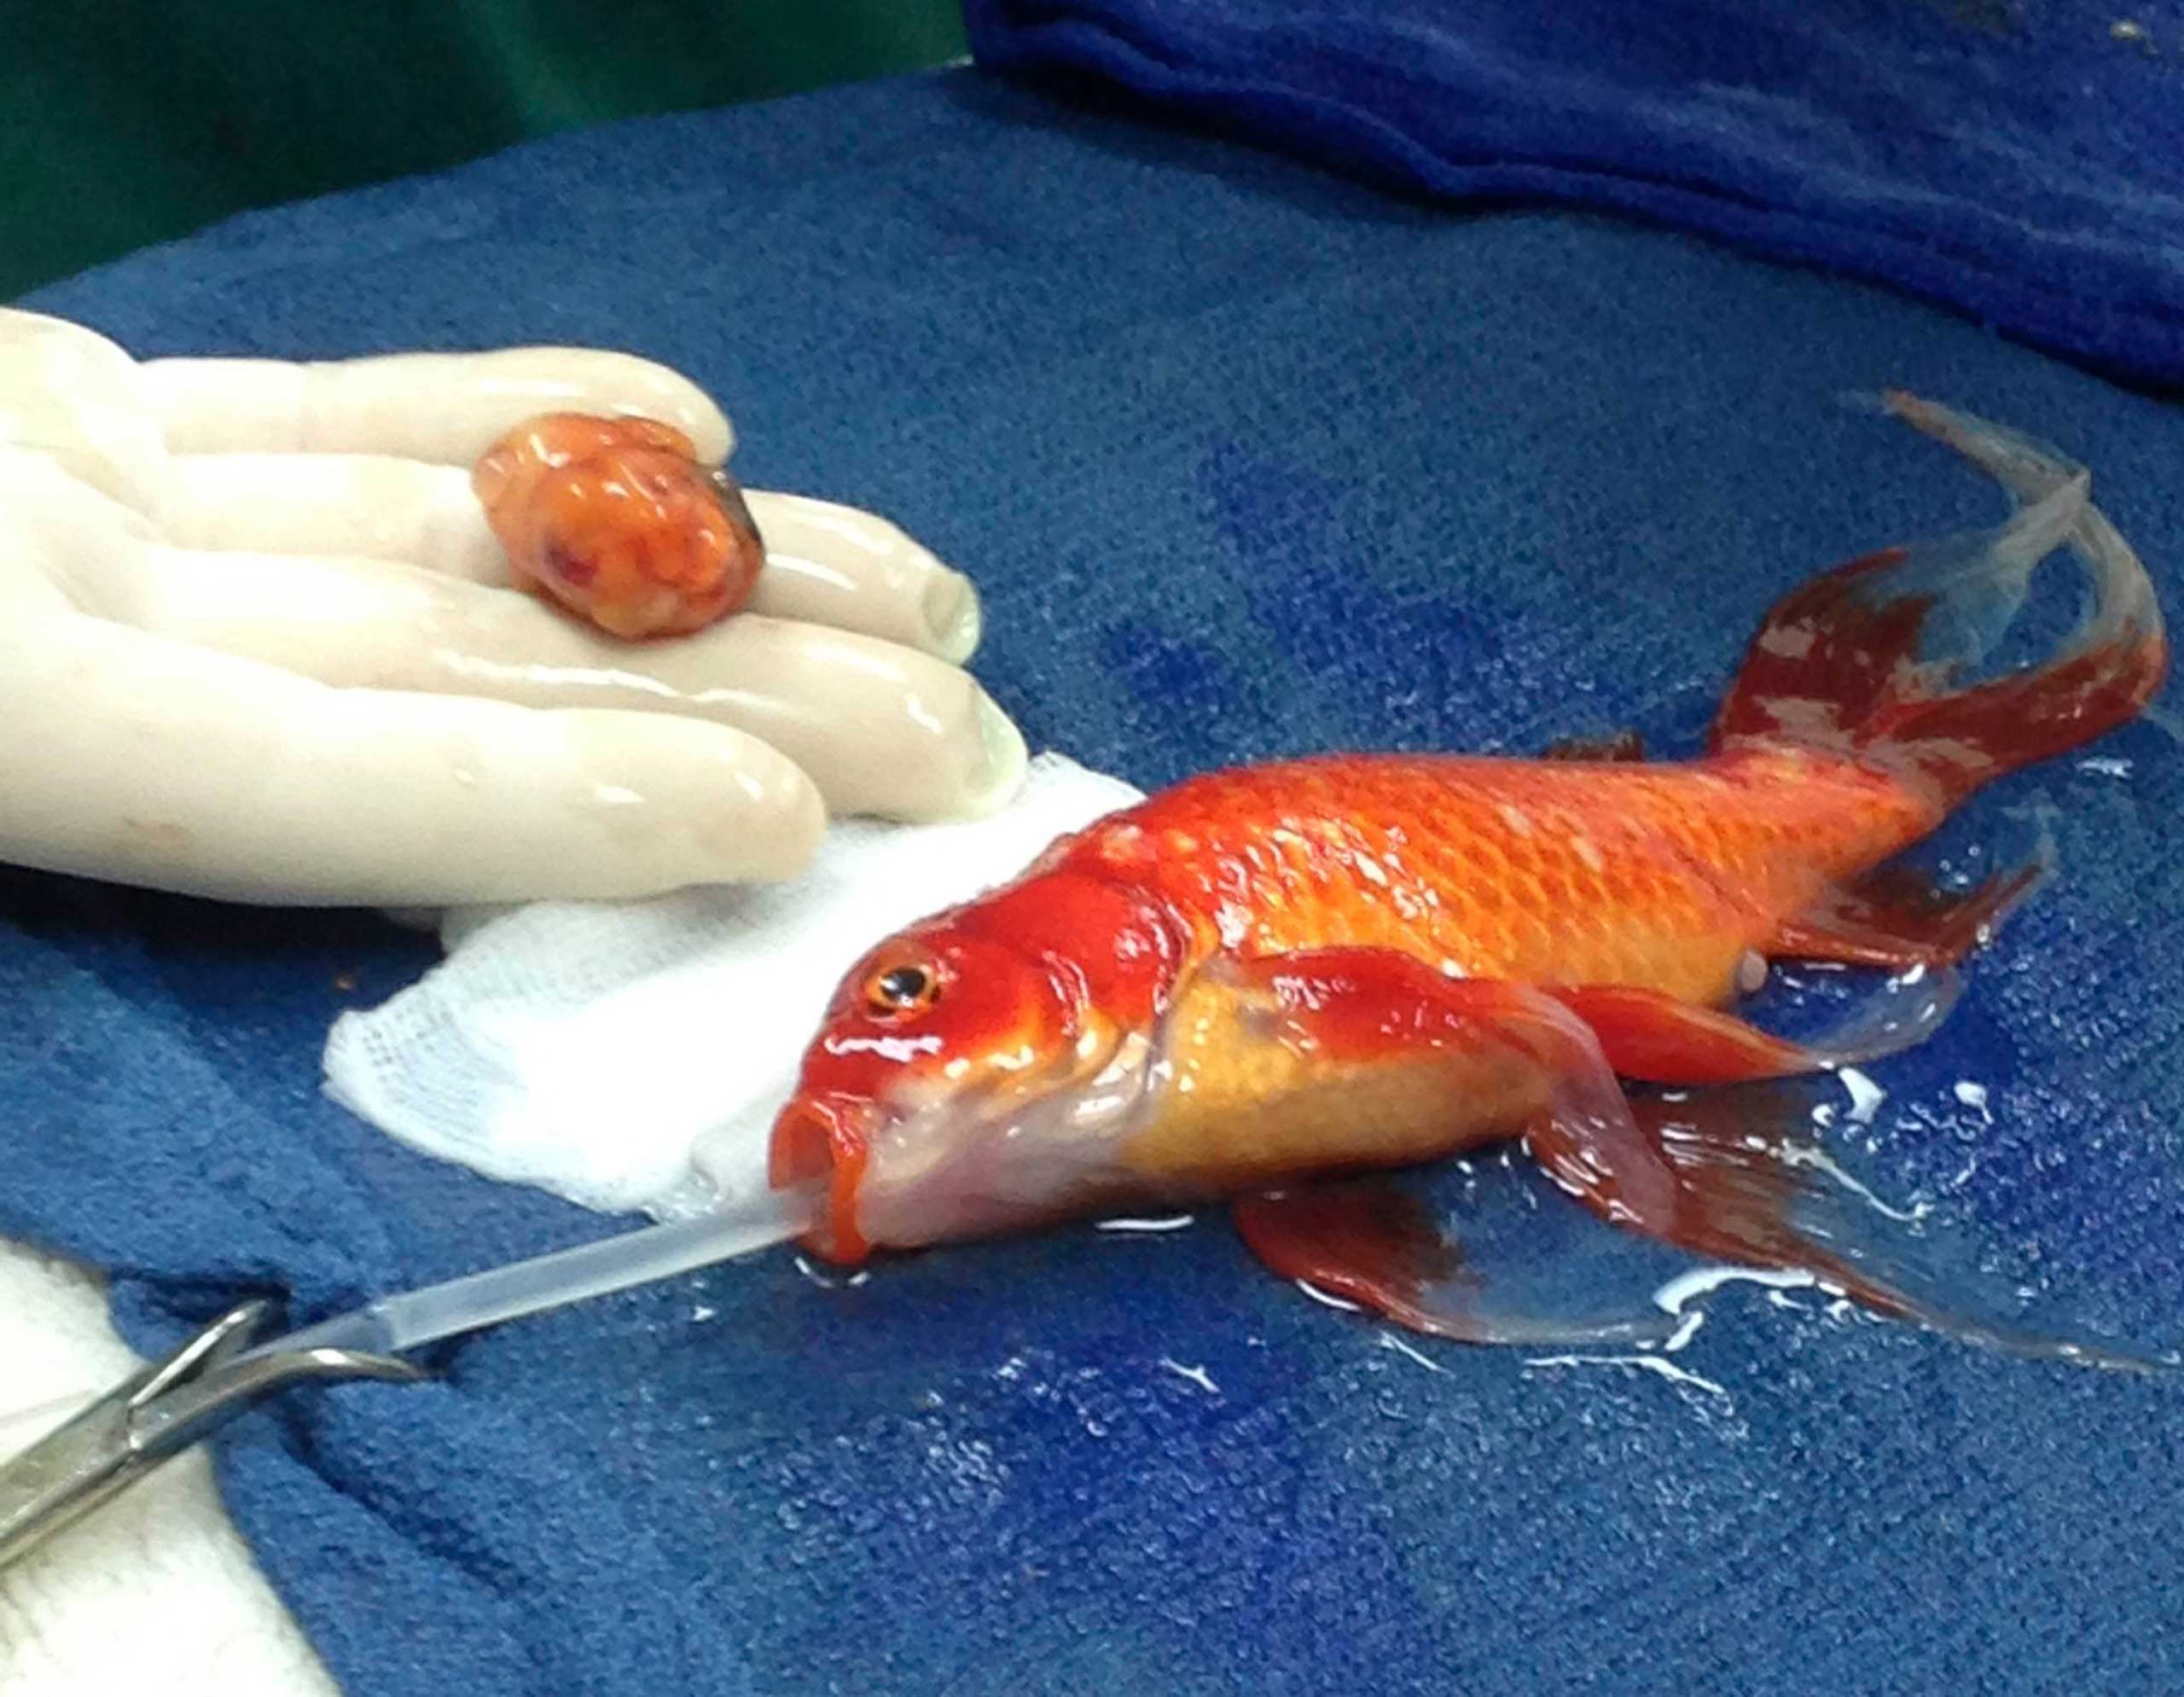 In this photo provided to Reuters by the Lort Smith Animal Hospital in Melbourne, a 10-year-old pet goldfish is operated for the removal of a life-threatening head tumor, Sept. 11, 2014.